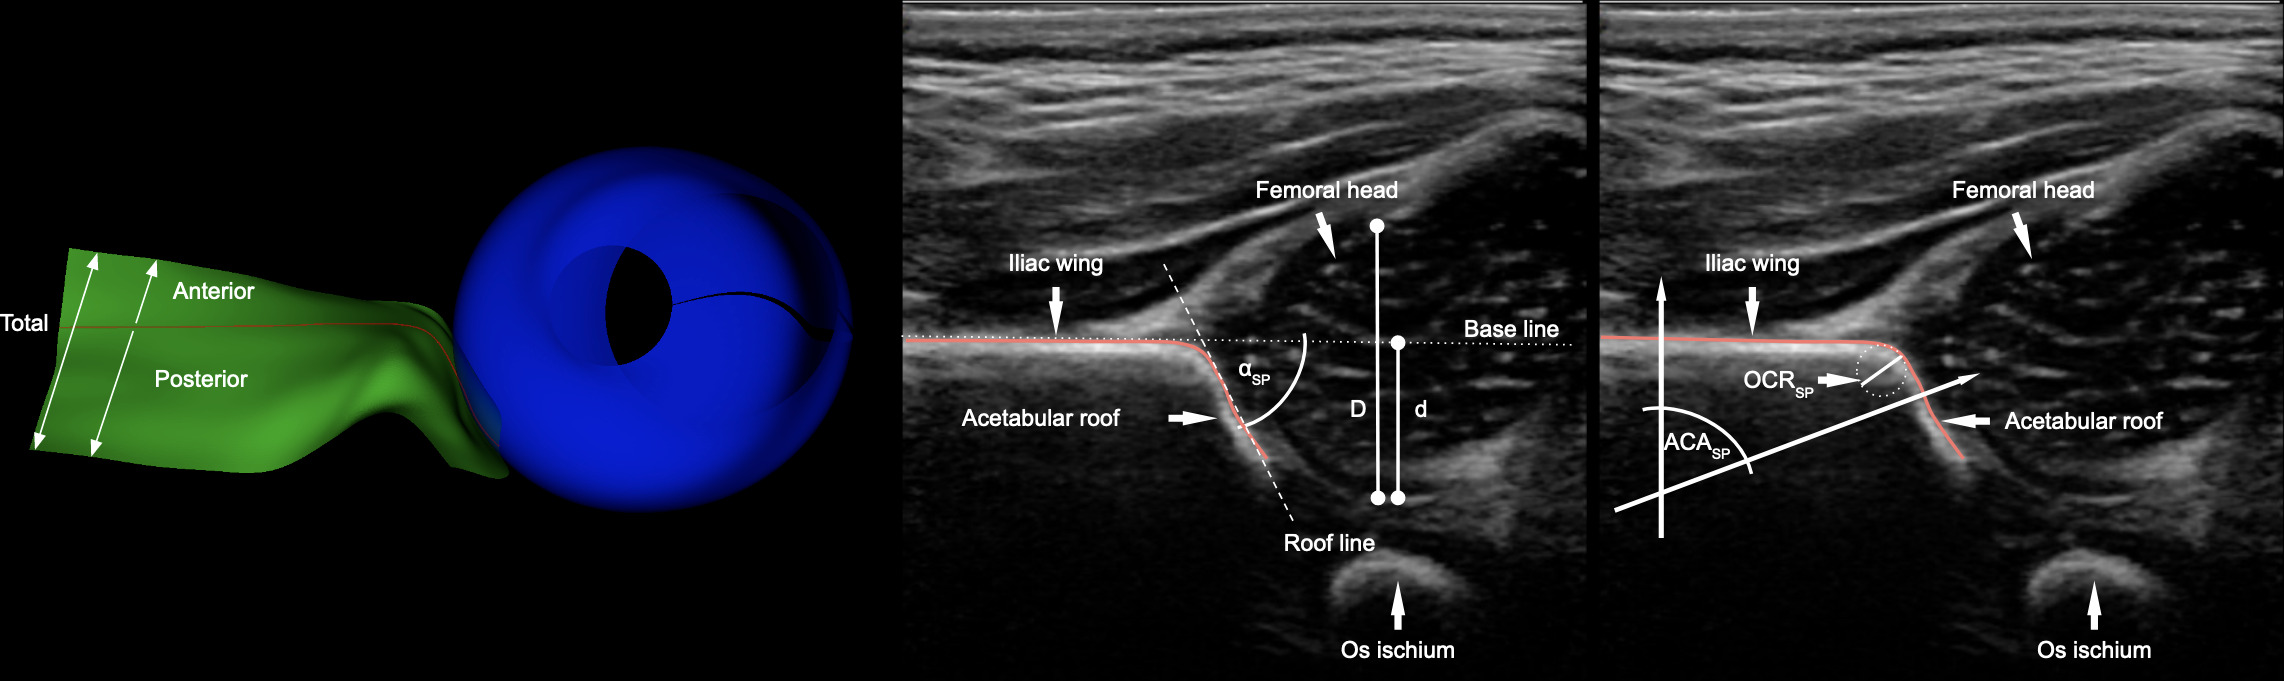 Fig. 1 
          Left: Acetabular surface model (ASM). Green part of the model represents iliac bone and acetabulum; blue part approximates femoral head. Standard plane contour (SPC; red) delineates the intersection of Graf’s standard plane (SP) and ASM. Middle: Coronal section of 3D ultrasound scan representing manually selected Graf’s SP and schema of α angle (αSP) and femoral head coverage (FHCSP = d/D). αSP and FHCSP are calculated semi-automatically from SPC (red) in a similar manner to the routine ultrasound examination. Right: ACASP is calculated from normal vectors of the SPC (red). OCRSP is the largest circle fitting under SPC to approximate the roundedness of the rim.
        